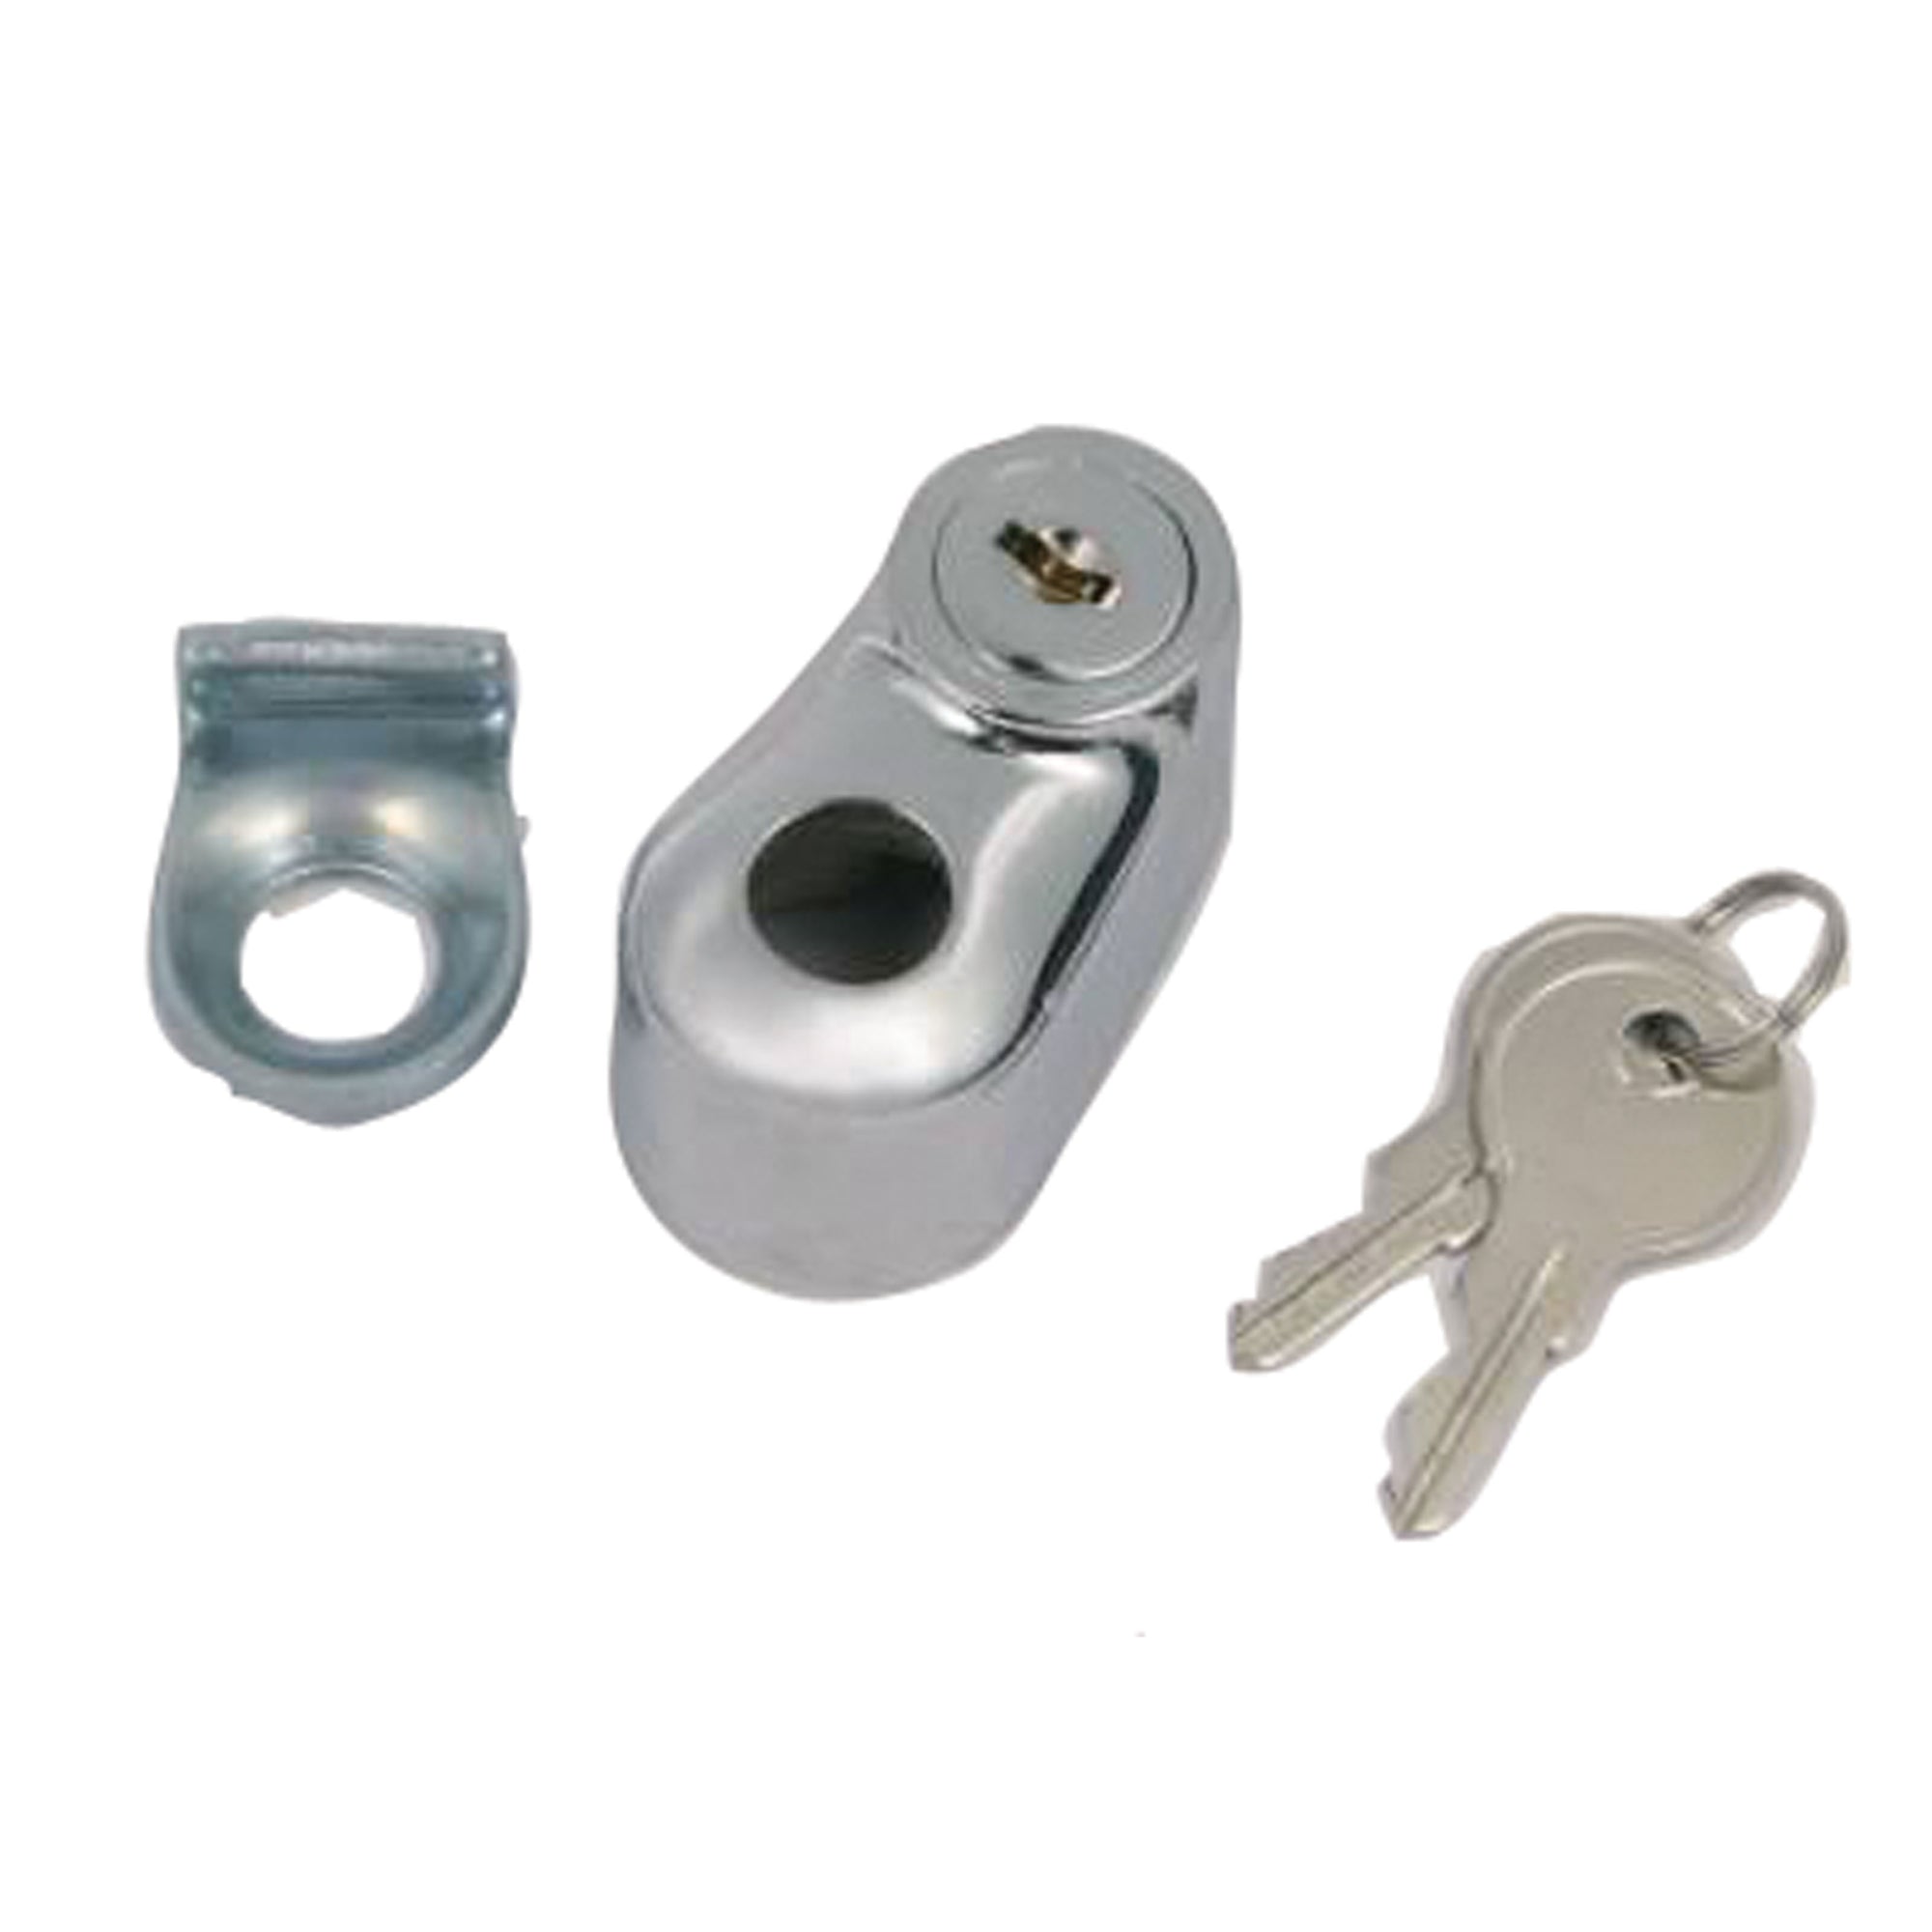 Trimax TNL740 Wyers Spare Tire Lock